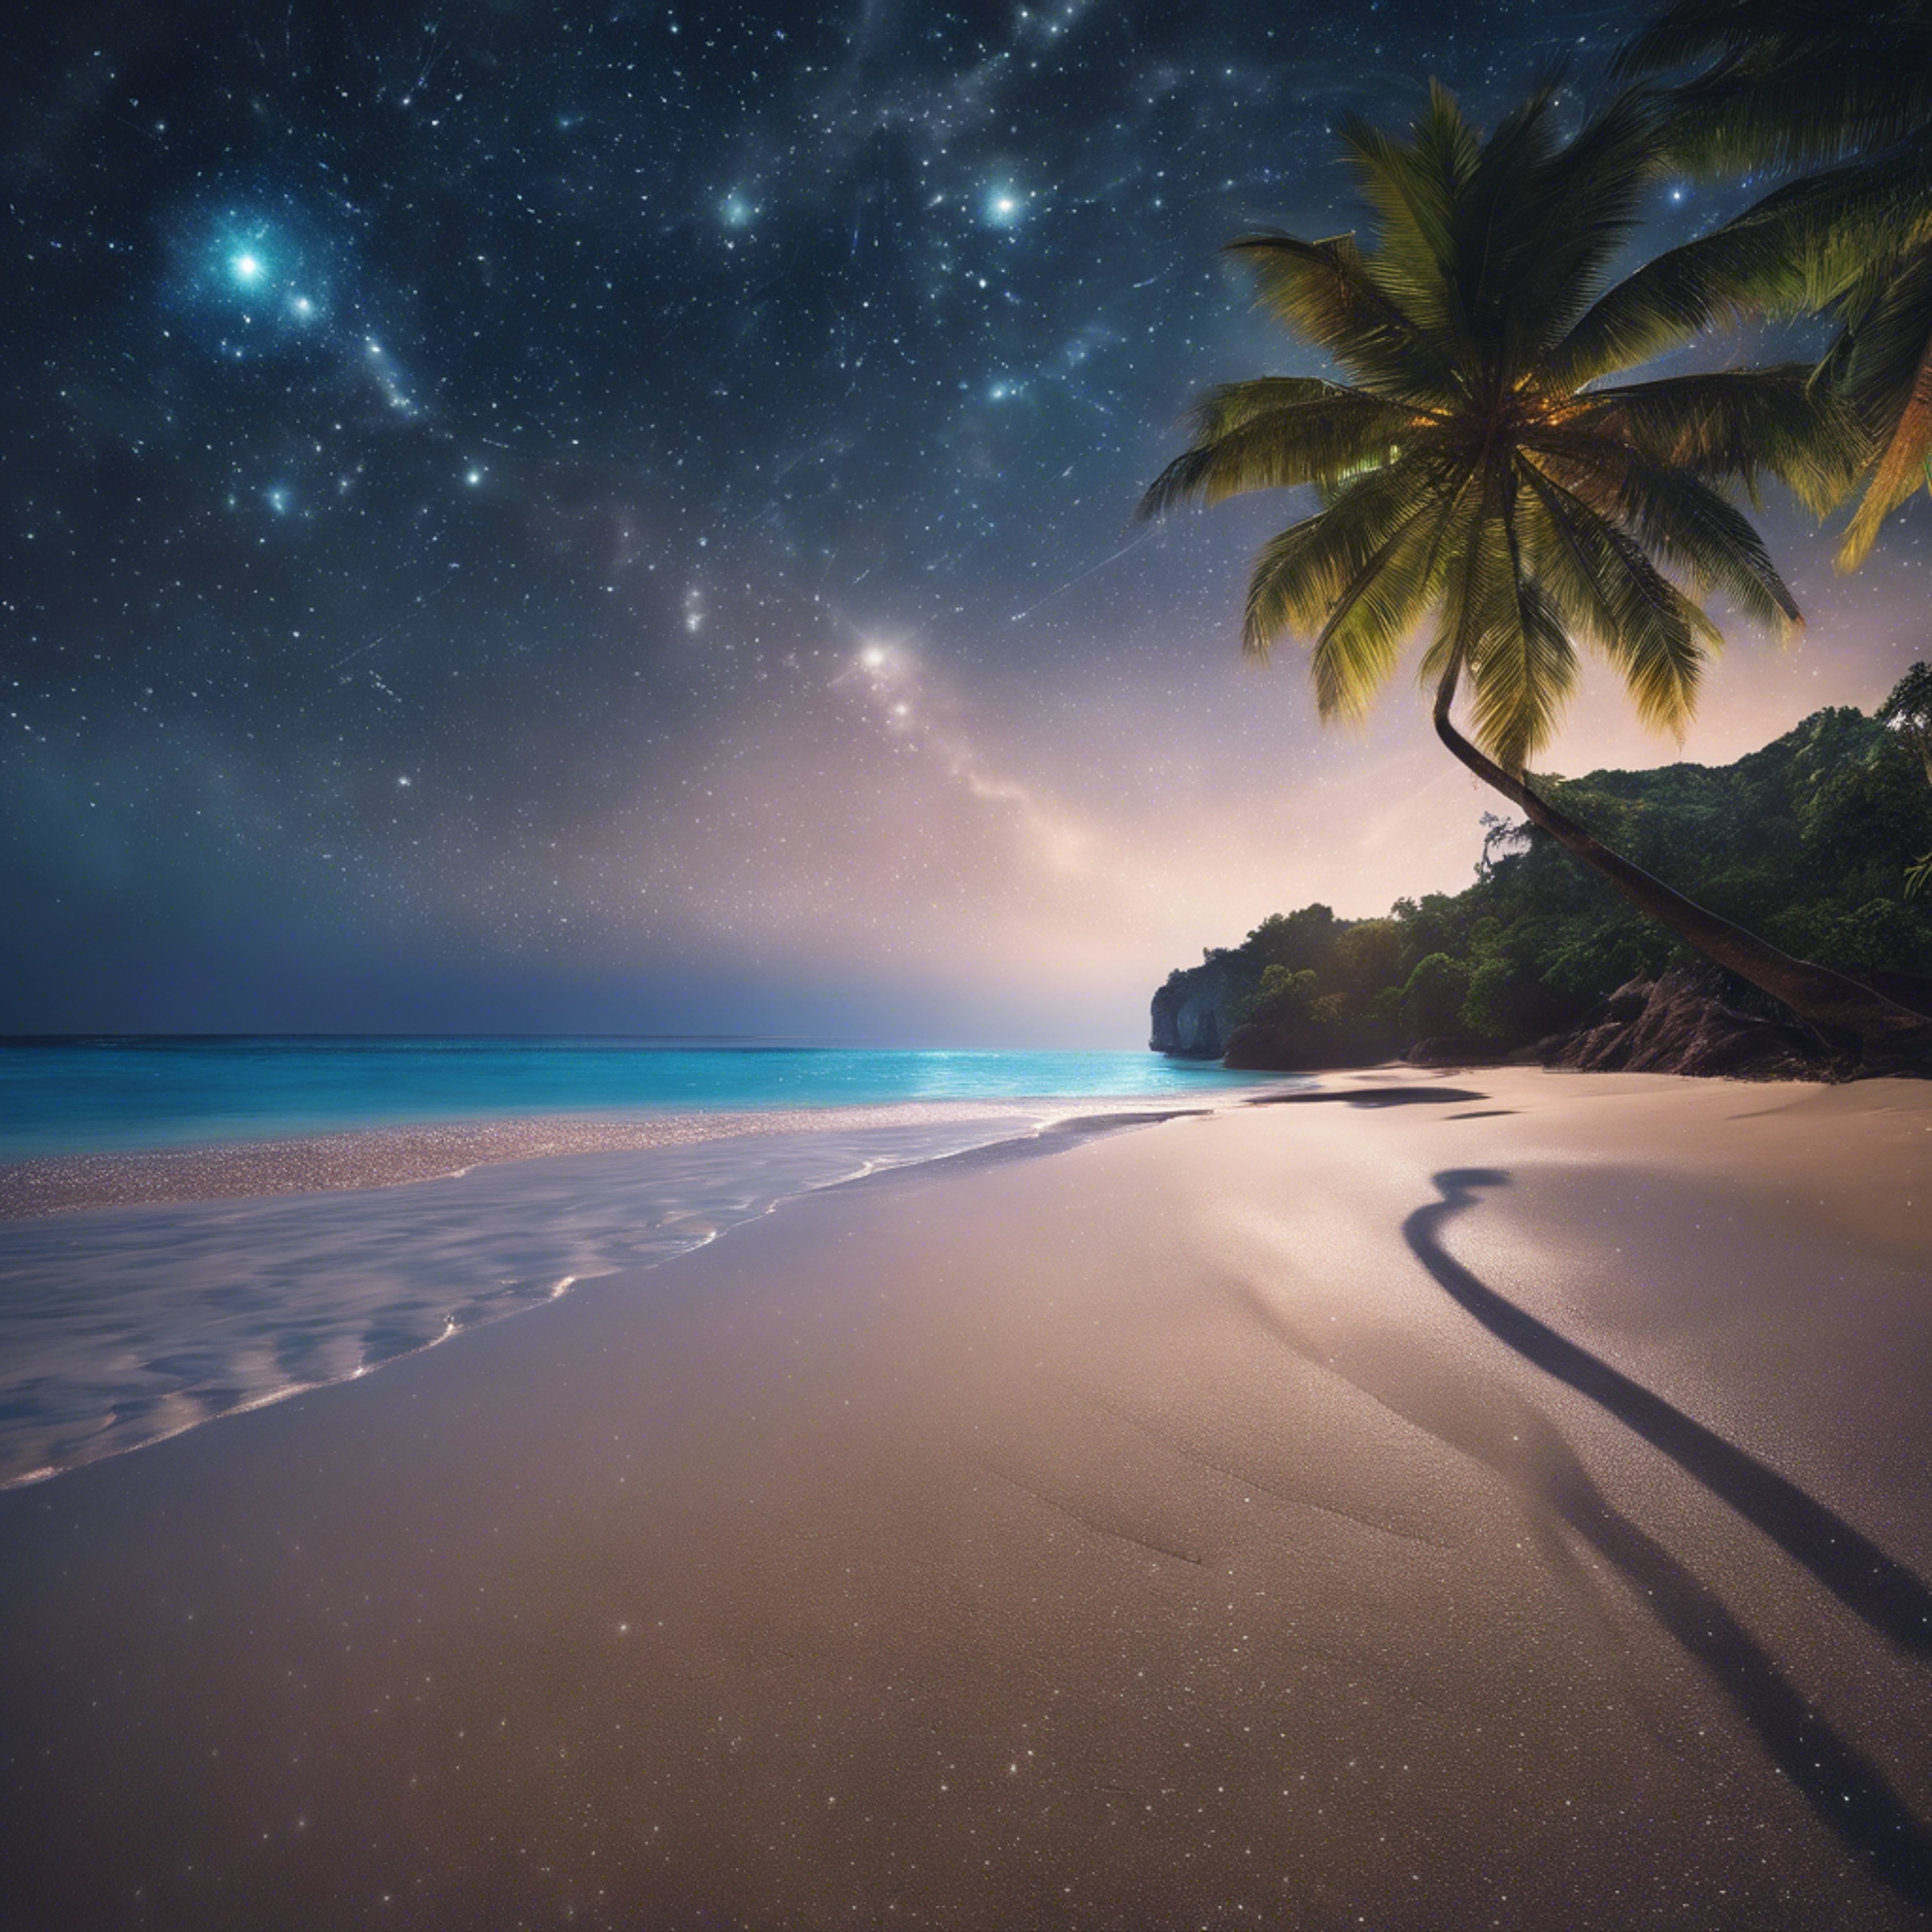 Gleaming stars encrusted in the night sky above a tranquil tropical beach. 벽지[e4d213f7e6244d2f8918]